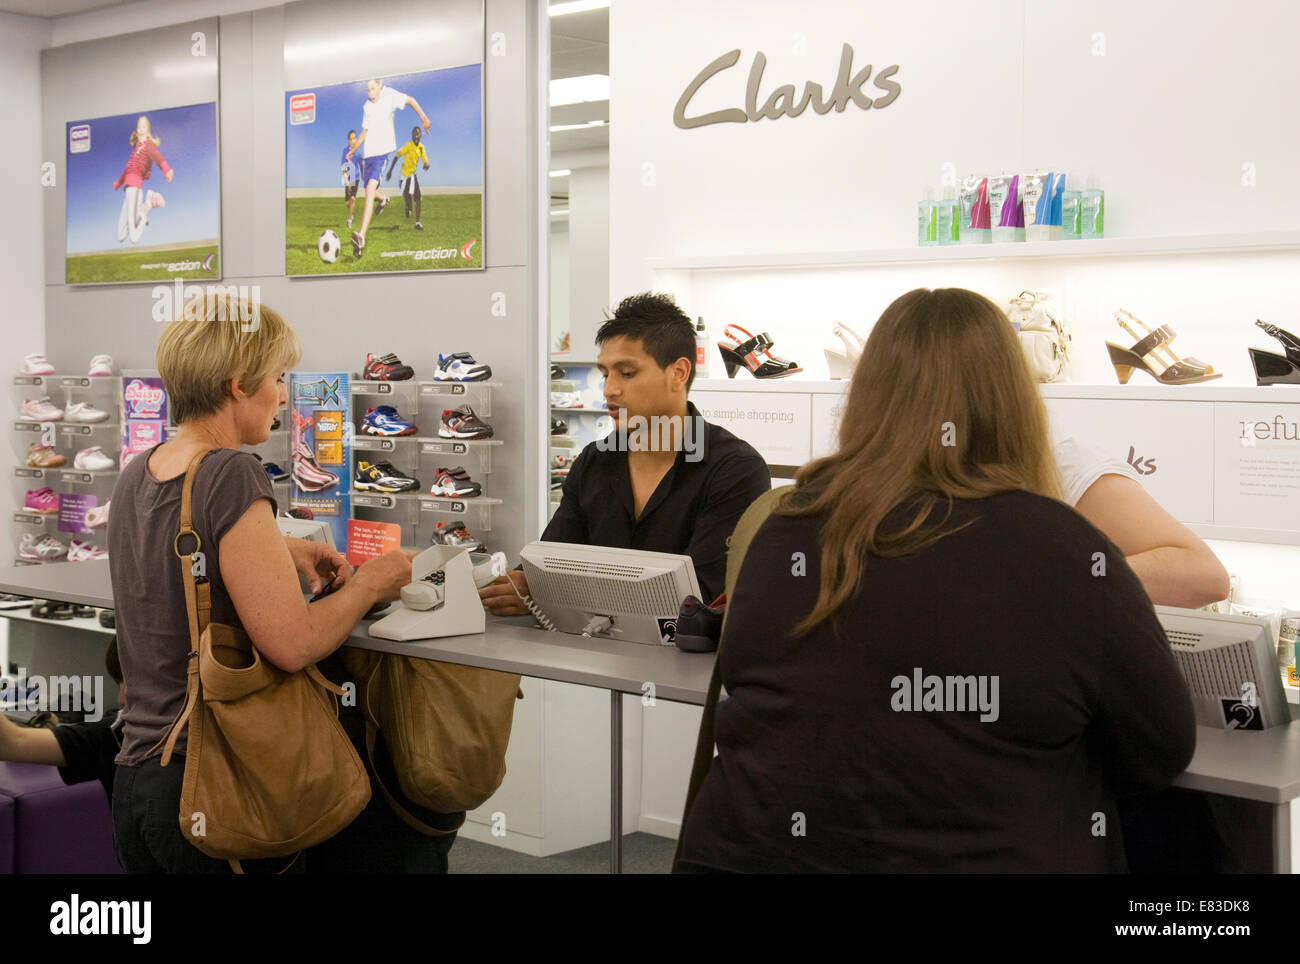 clarks shoes jobs blackpool